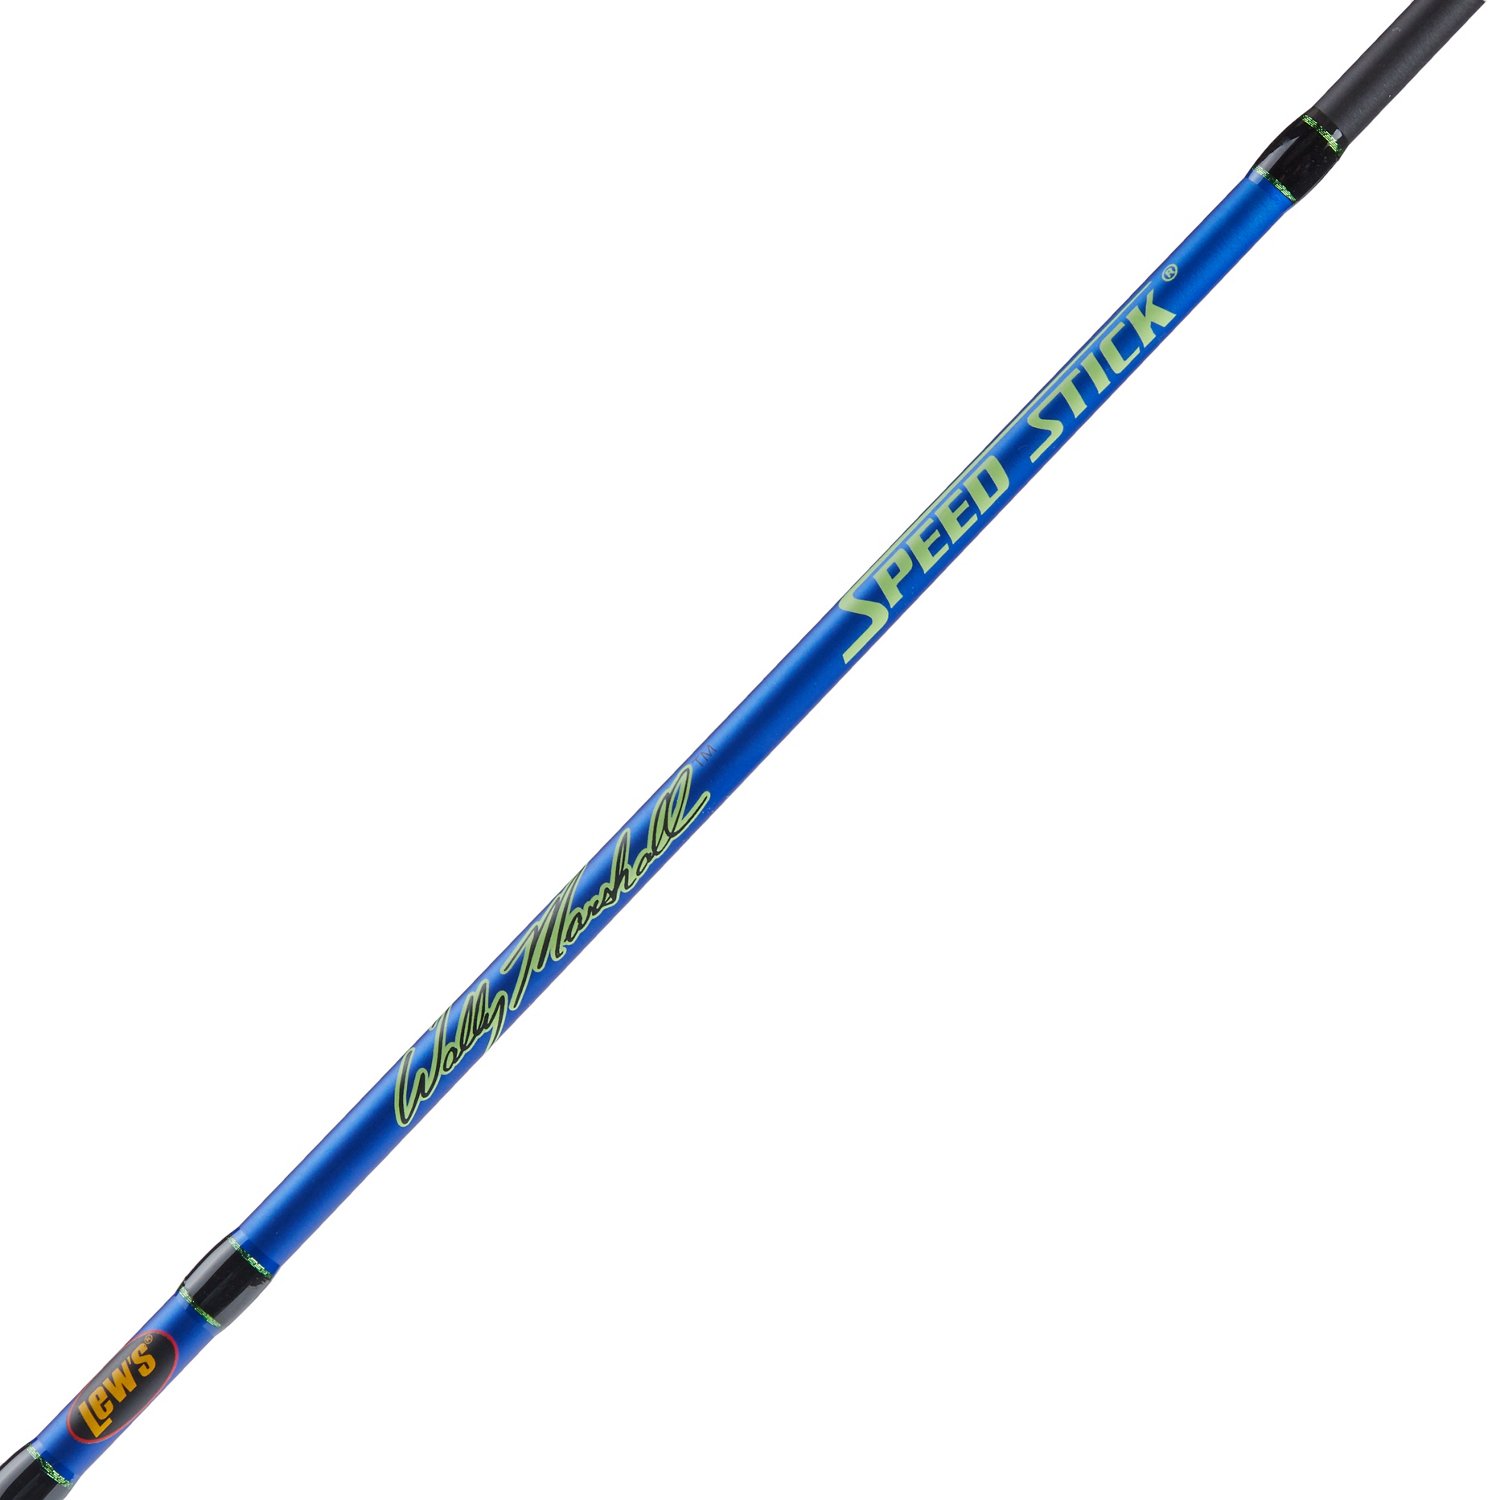 Lew's Wally Marshall Speed Stick 8 ft ML Spinning Rod